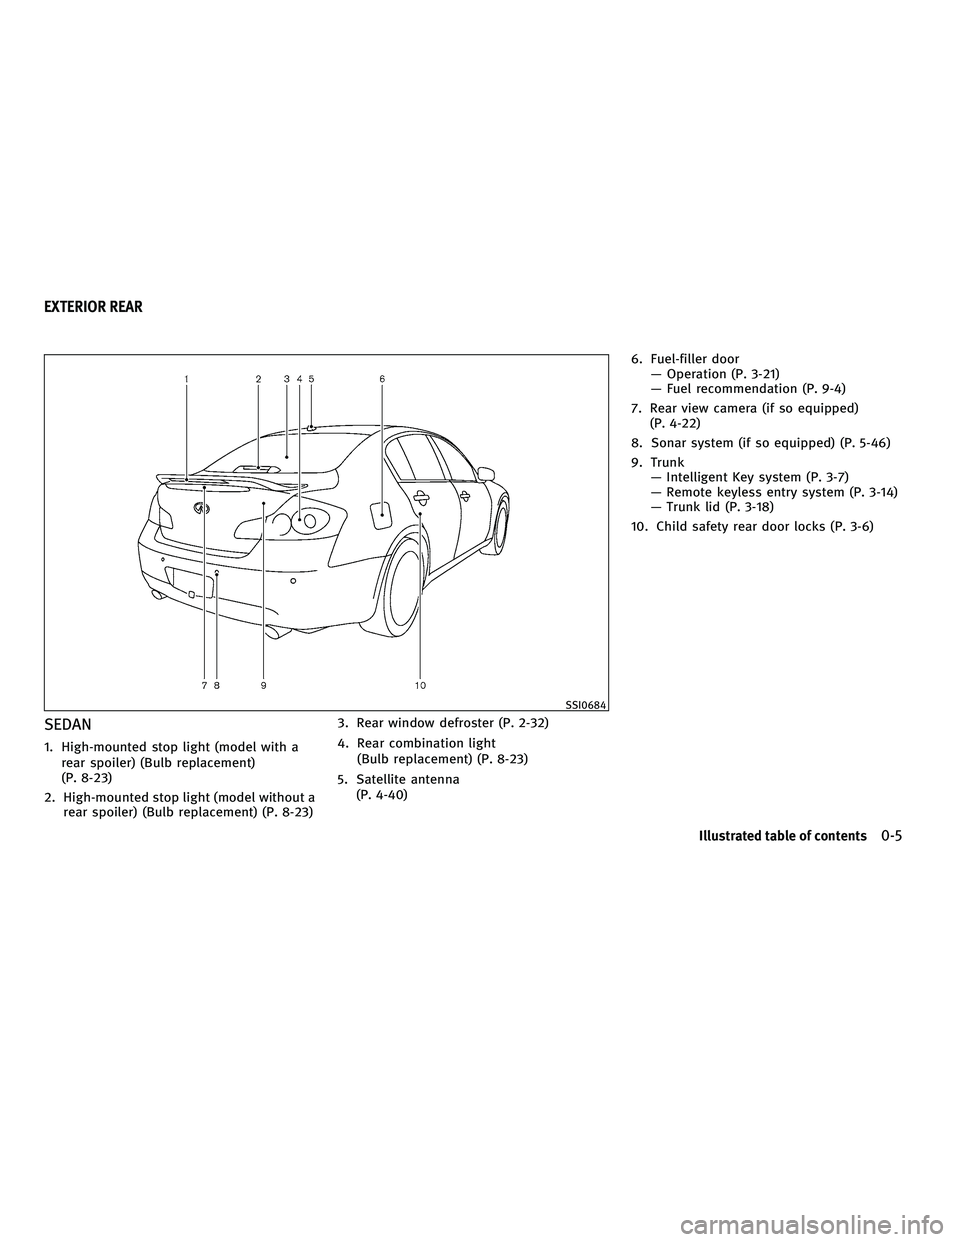 INFINITI G-COUPE 2010  Owners Manual SEDAN
1. High-mounted stop light (model with arear spoiler) (Bulb replacement)
(P. 8-23)
2. High-mounted stop light (model without a rear spoiler) (Bulb replacement) (P. 8-23) 3. Rear window defroster